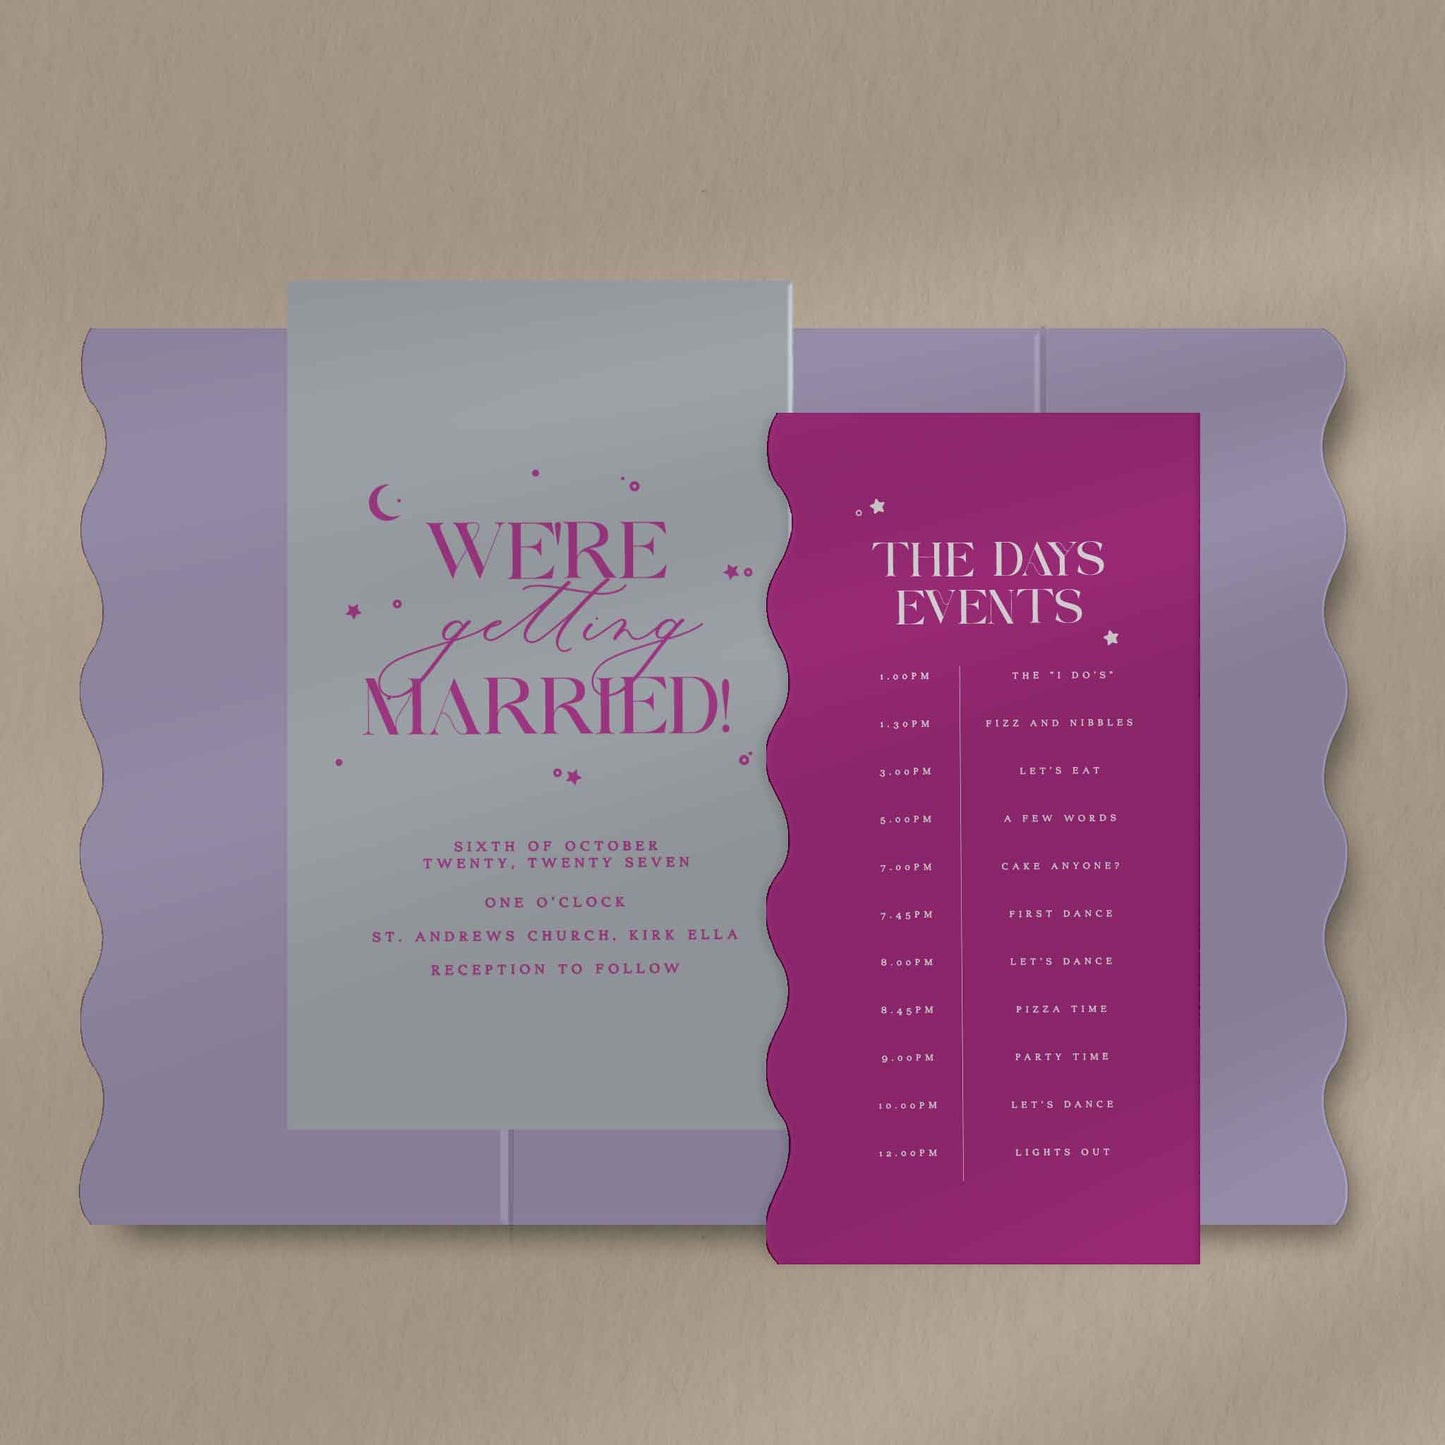 Scallop Envelope Sample  Ivy and Gold Wedding Stationery Hallee  